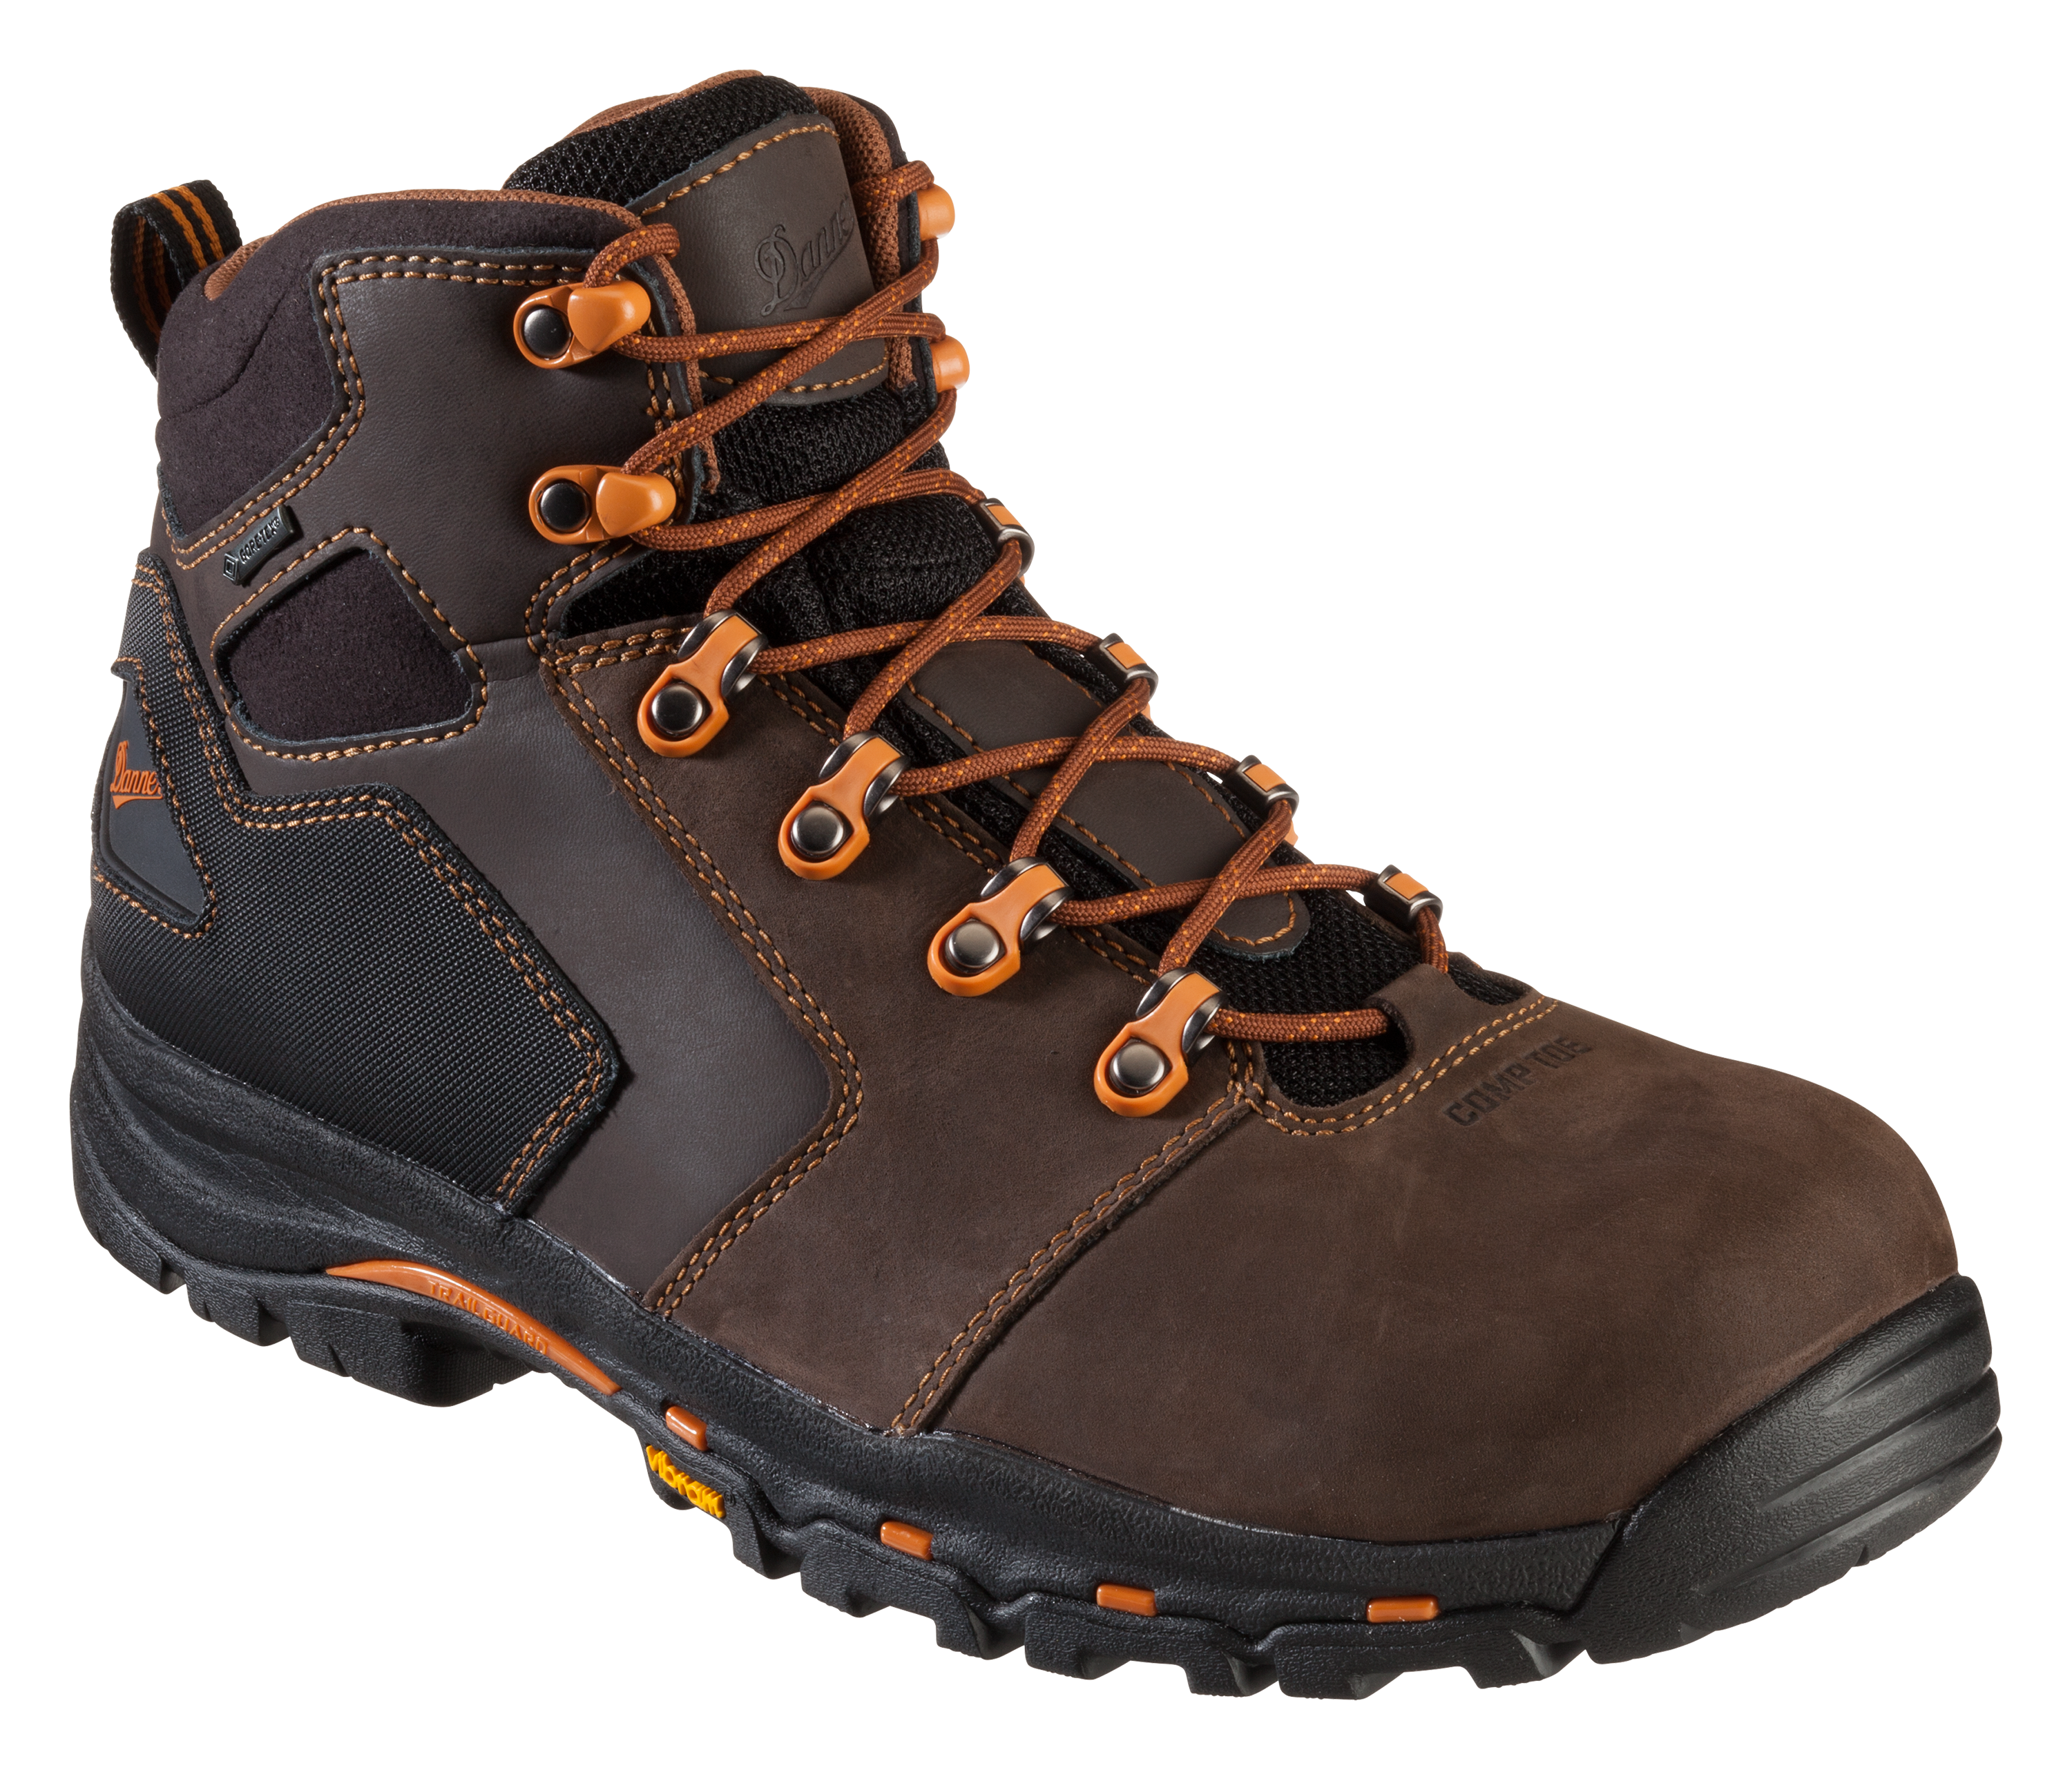 Danner Vicious GORE-TEX Non-Metallic Safety Toe Work Boots for Men - Brown - 11W